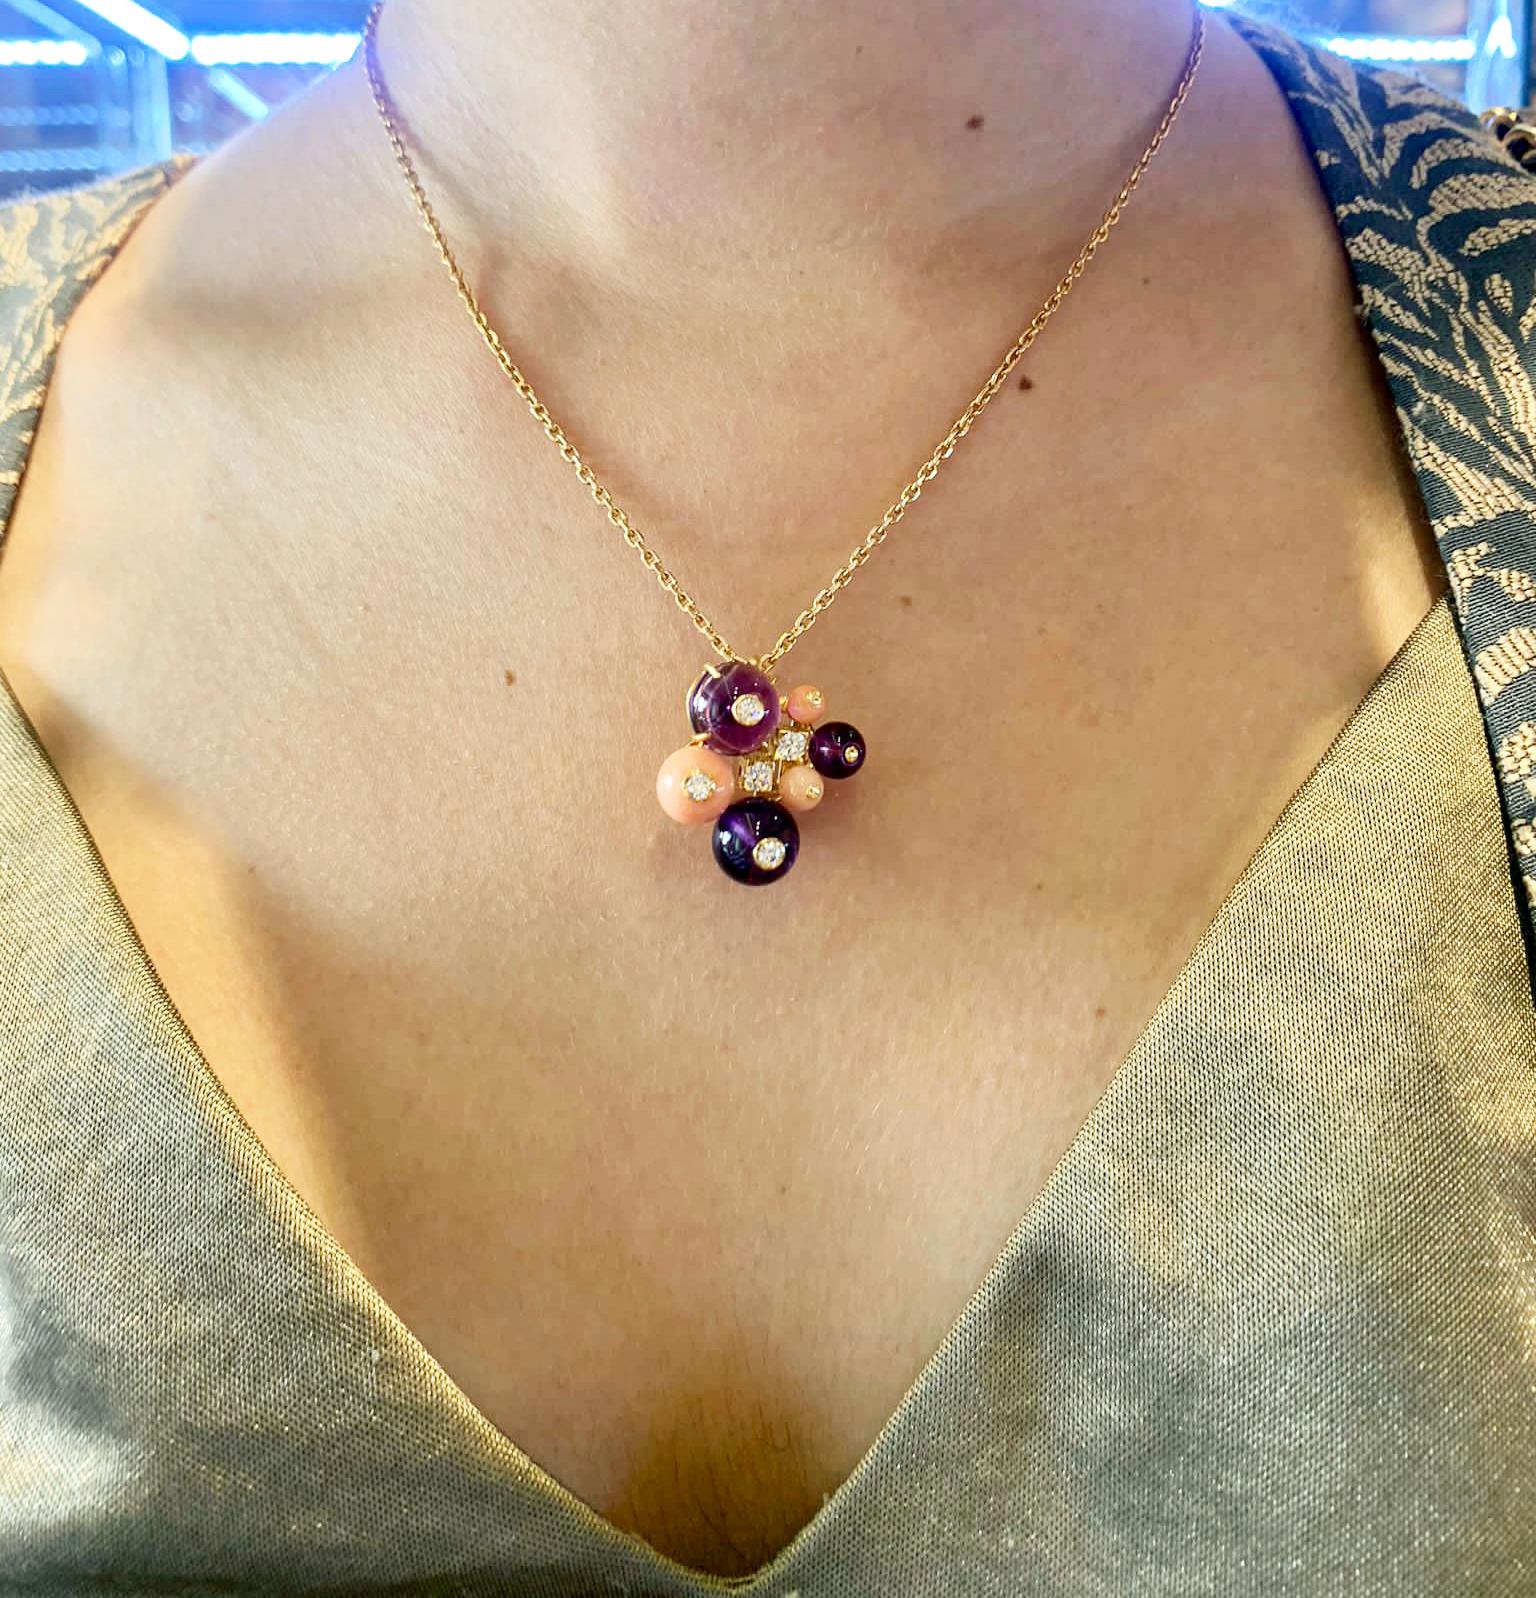 Women's or Men's Cartier ‘Delice de Goa’ Necklace with Amethyst, Diamonds and Coral in 18K Gold